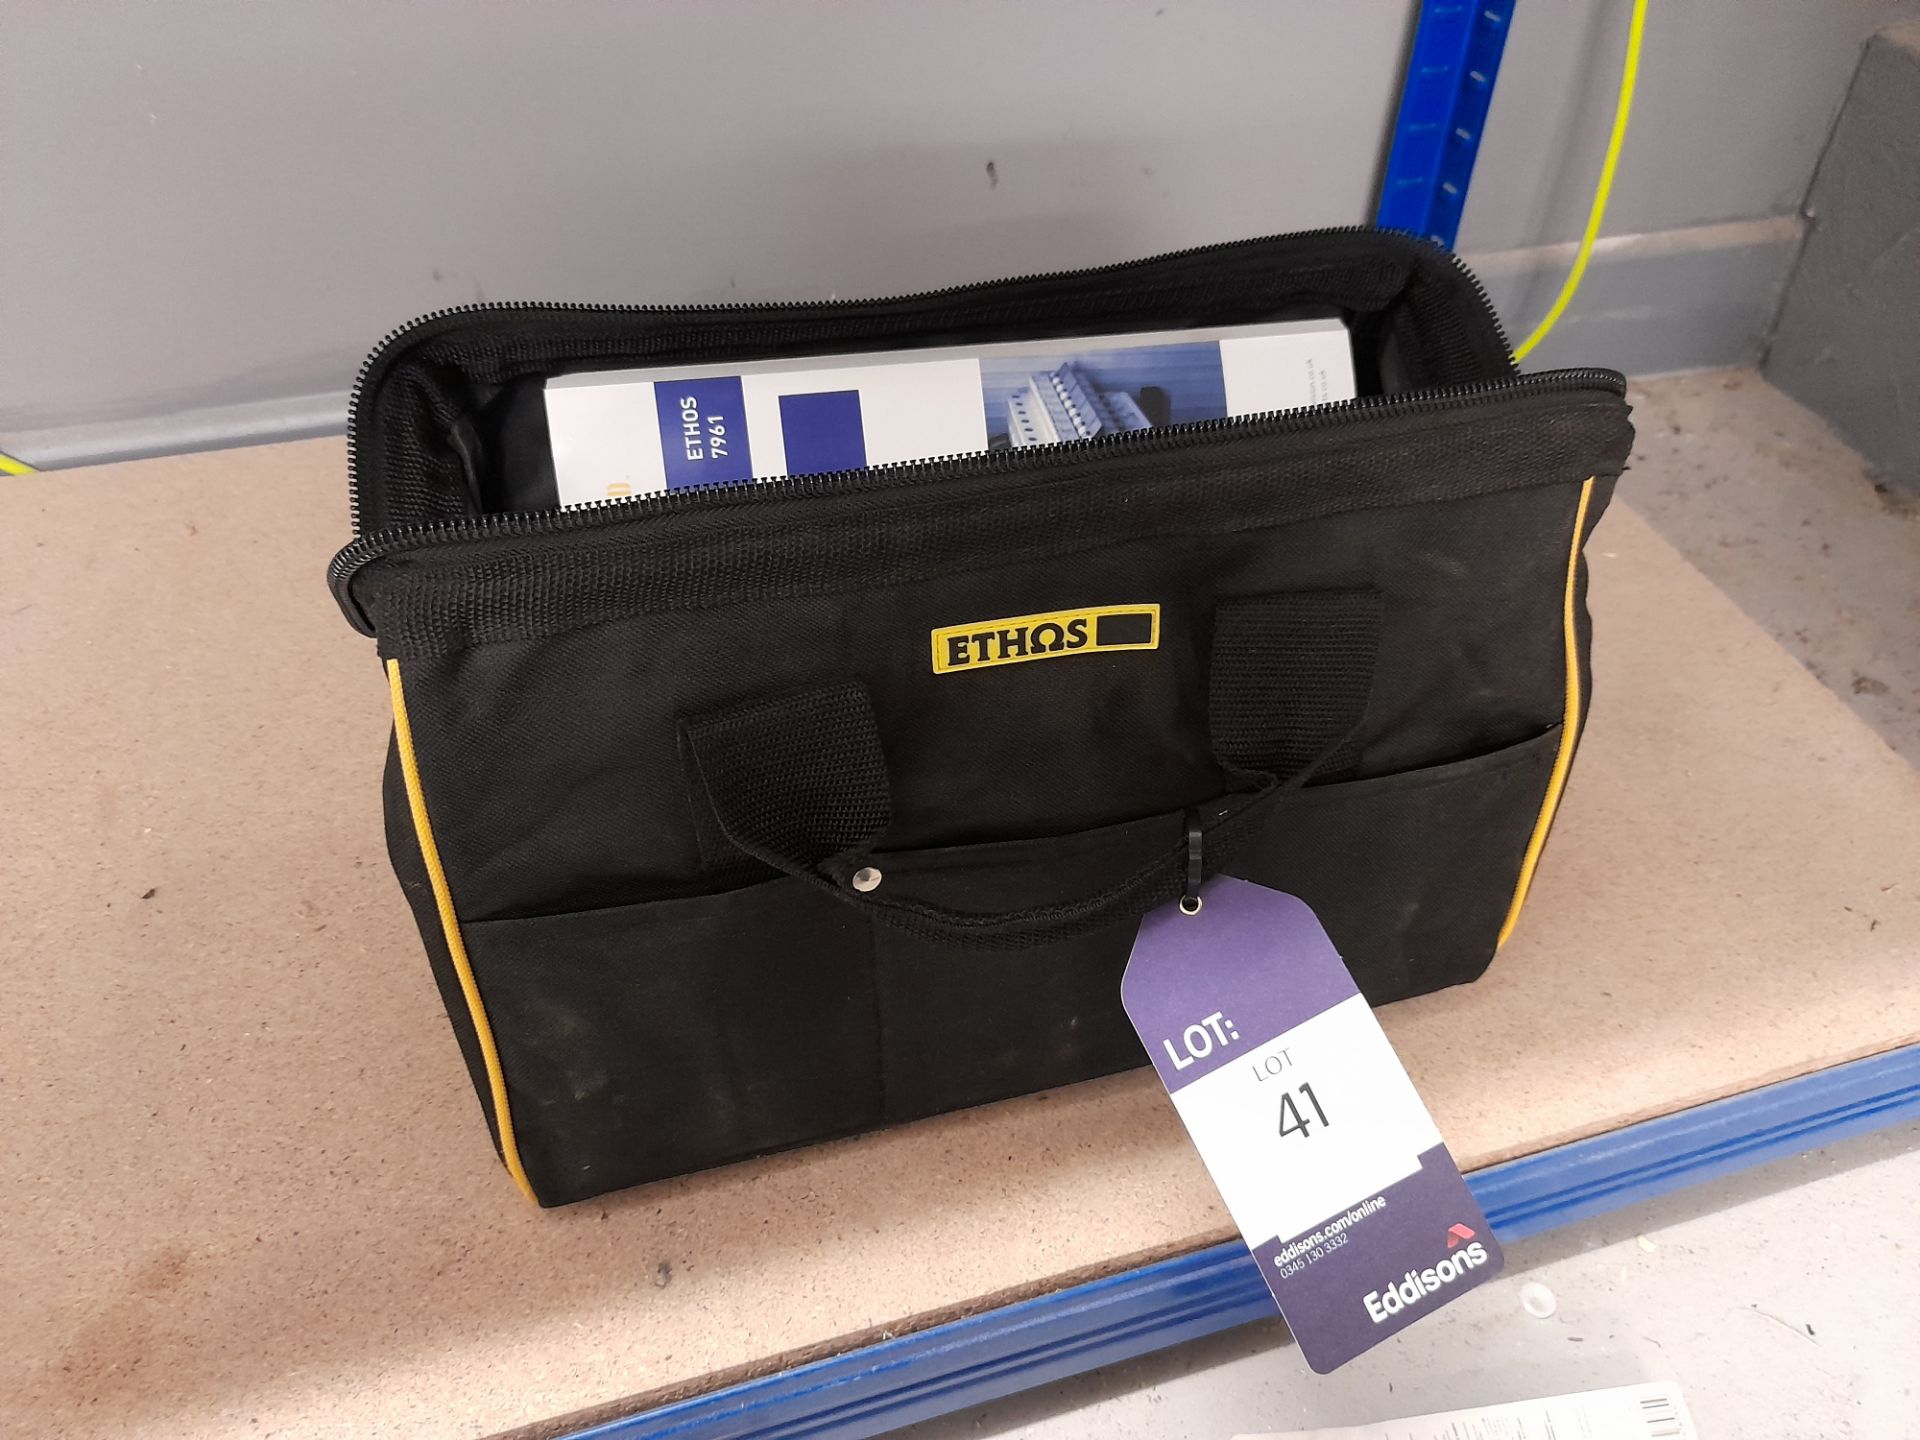 Ethos 9100 circuit tester, with case